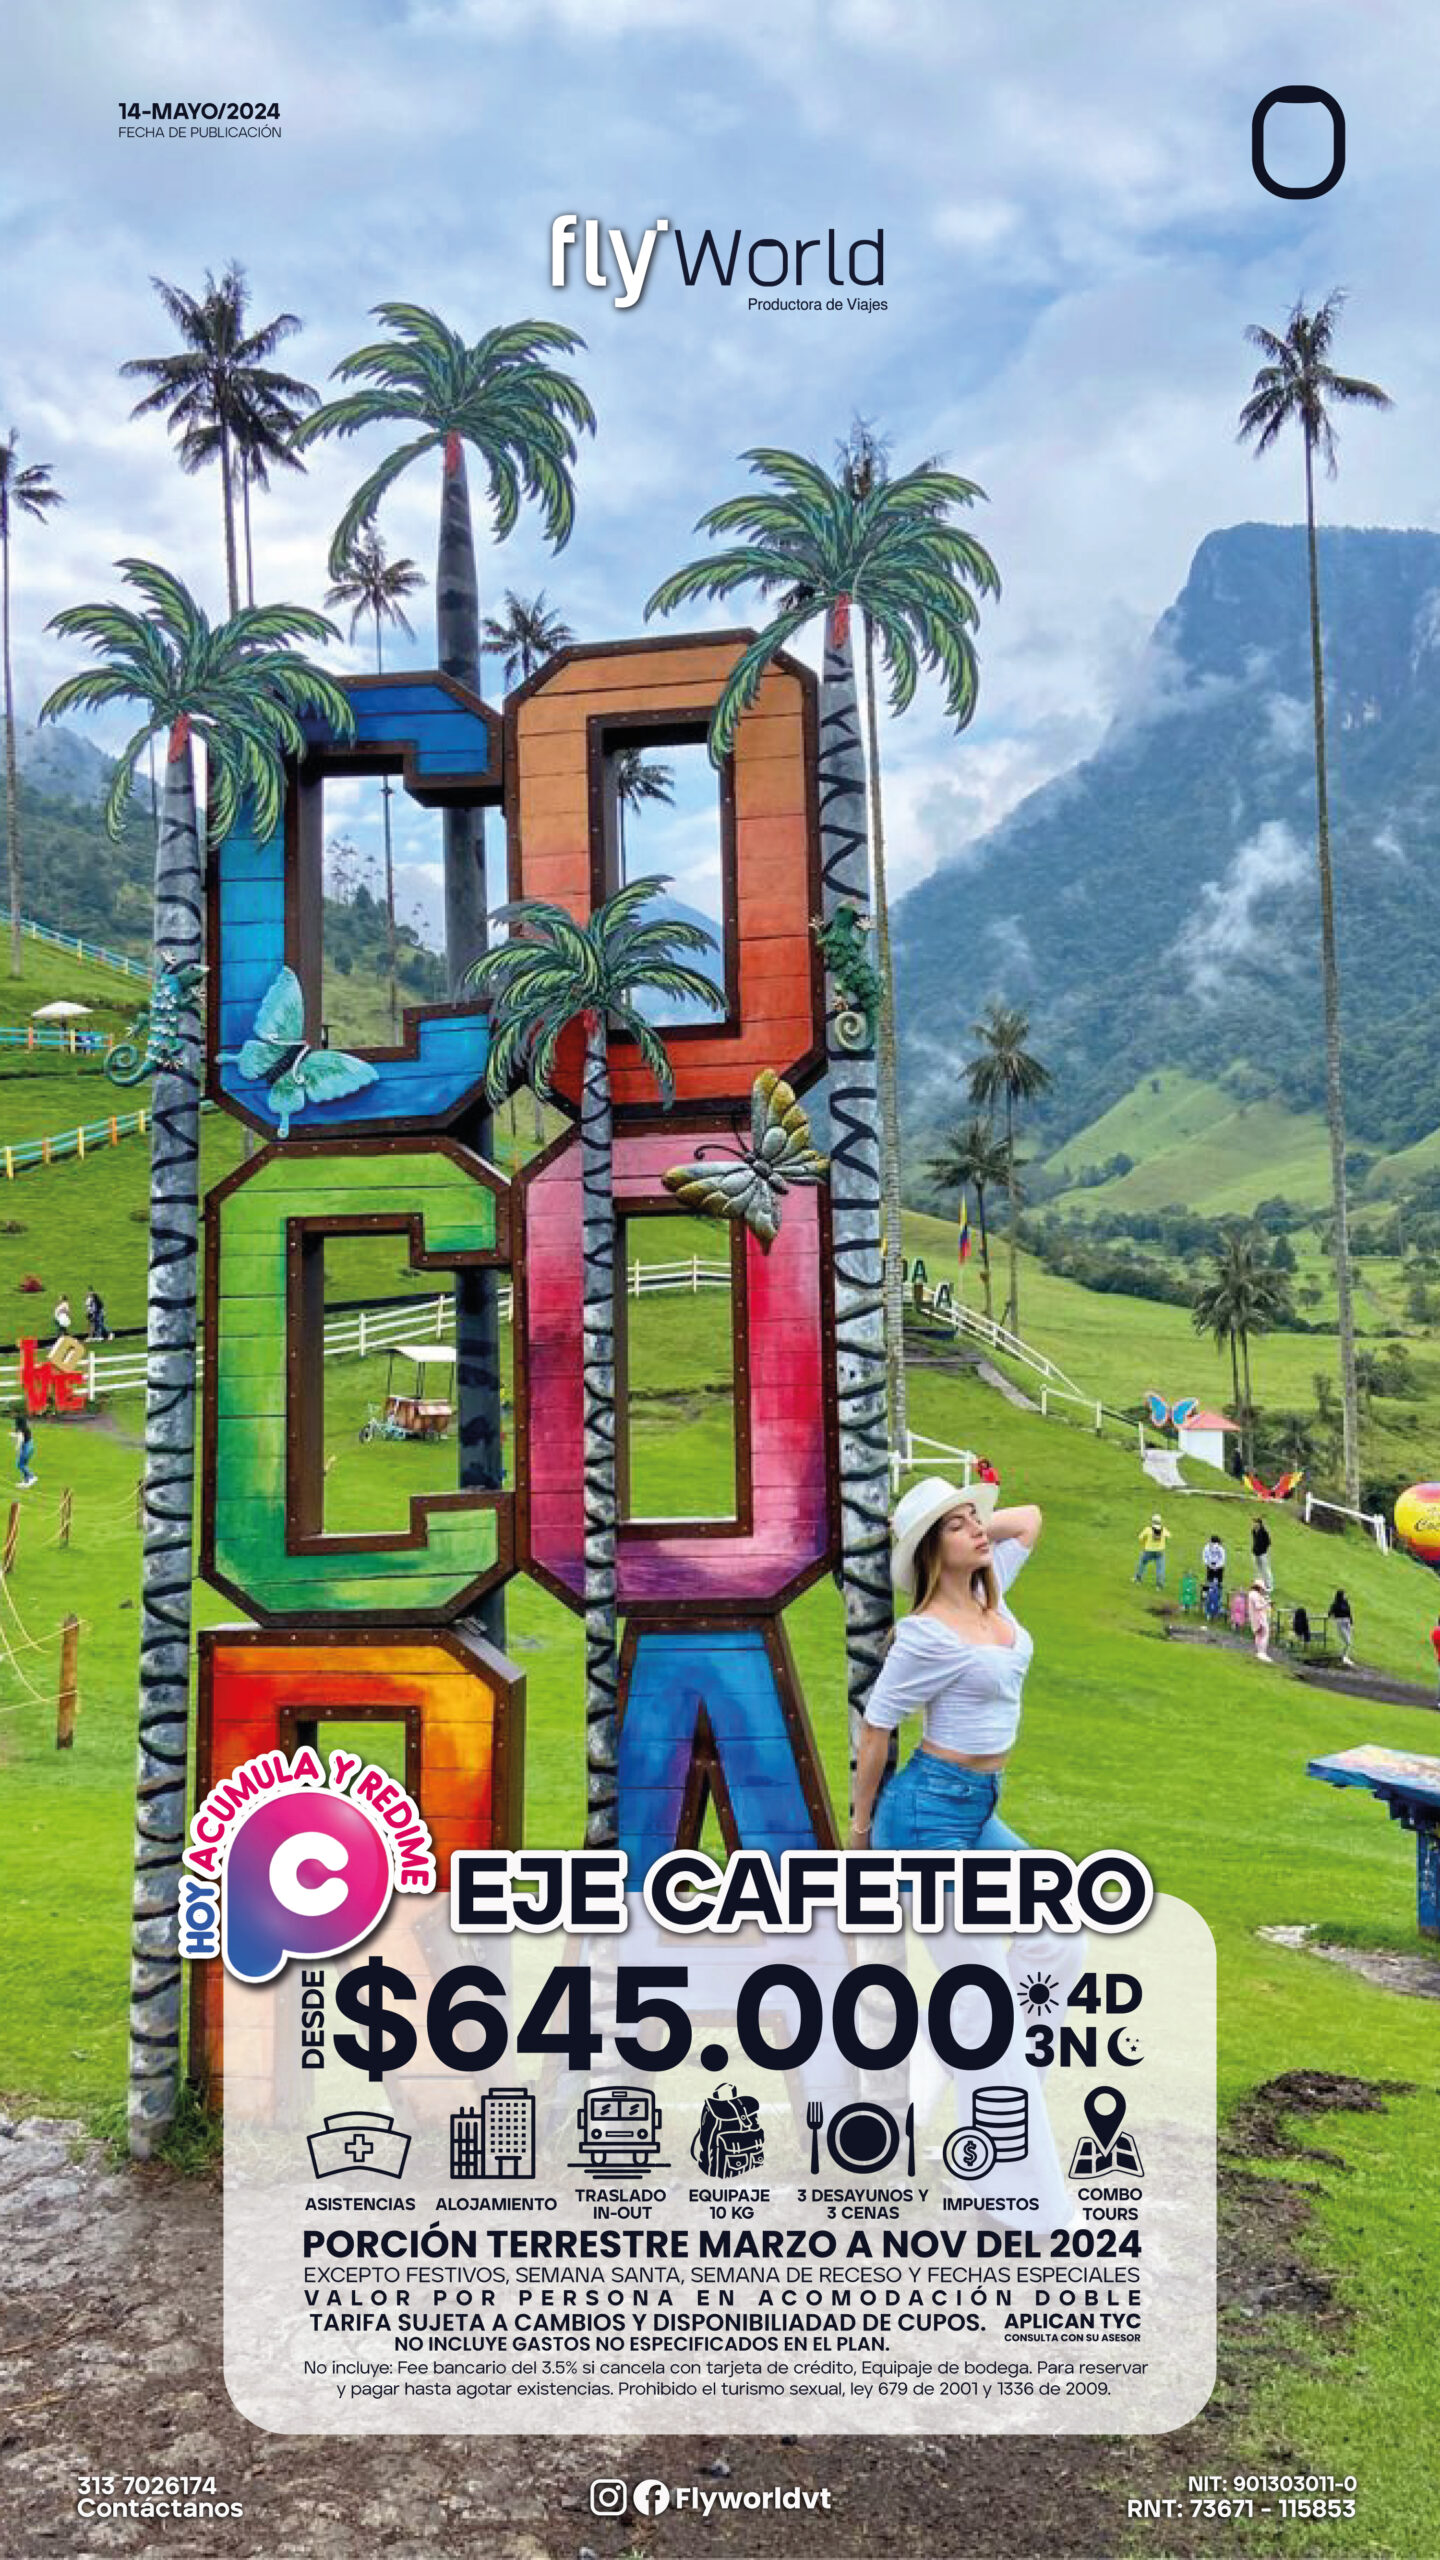 EJE-CAFETERO